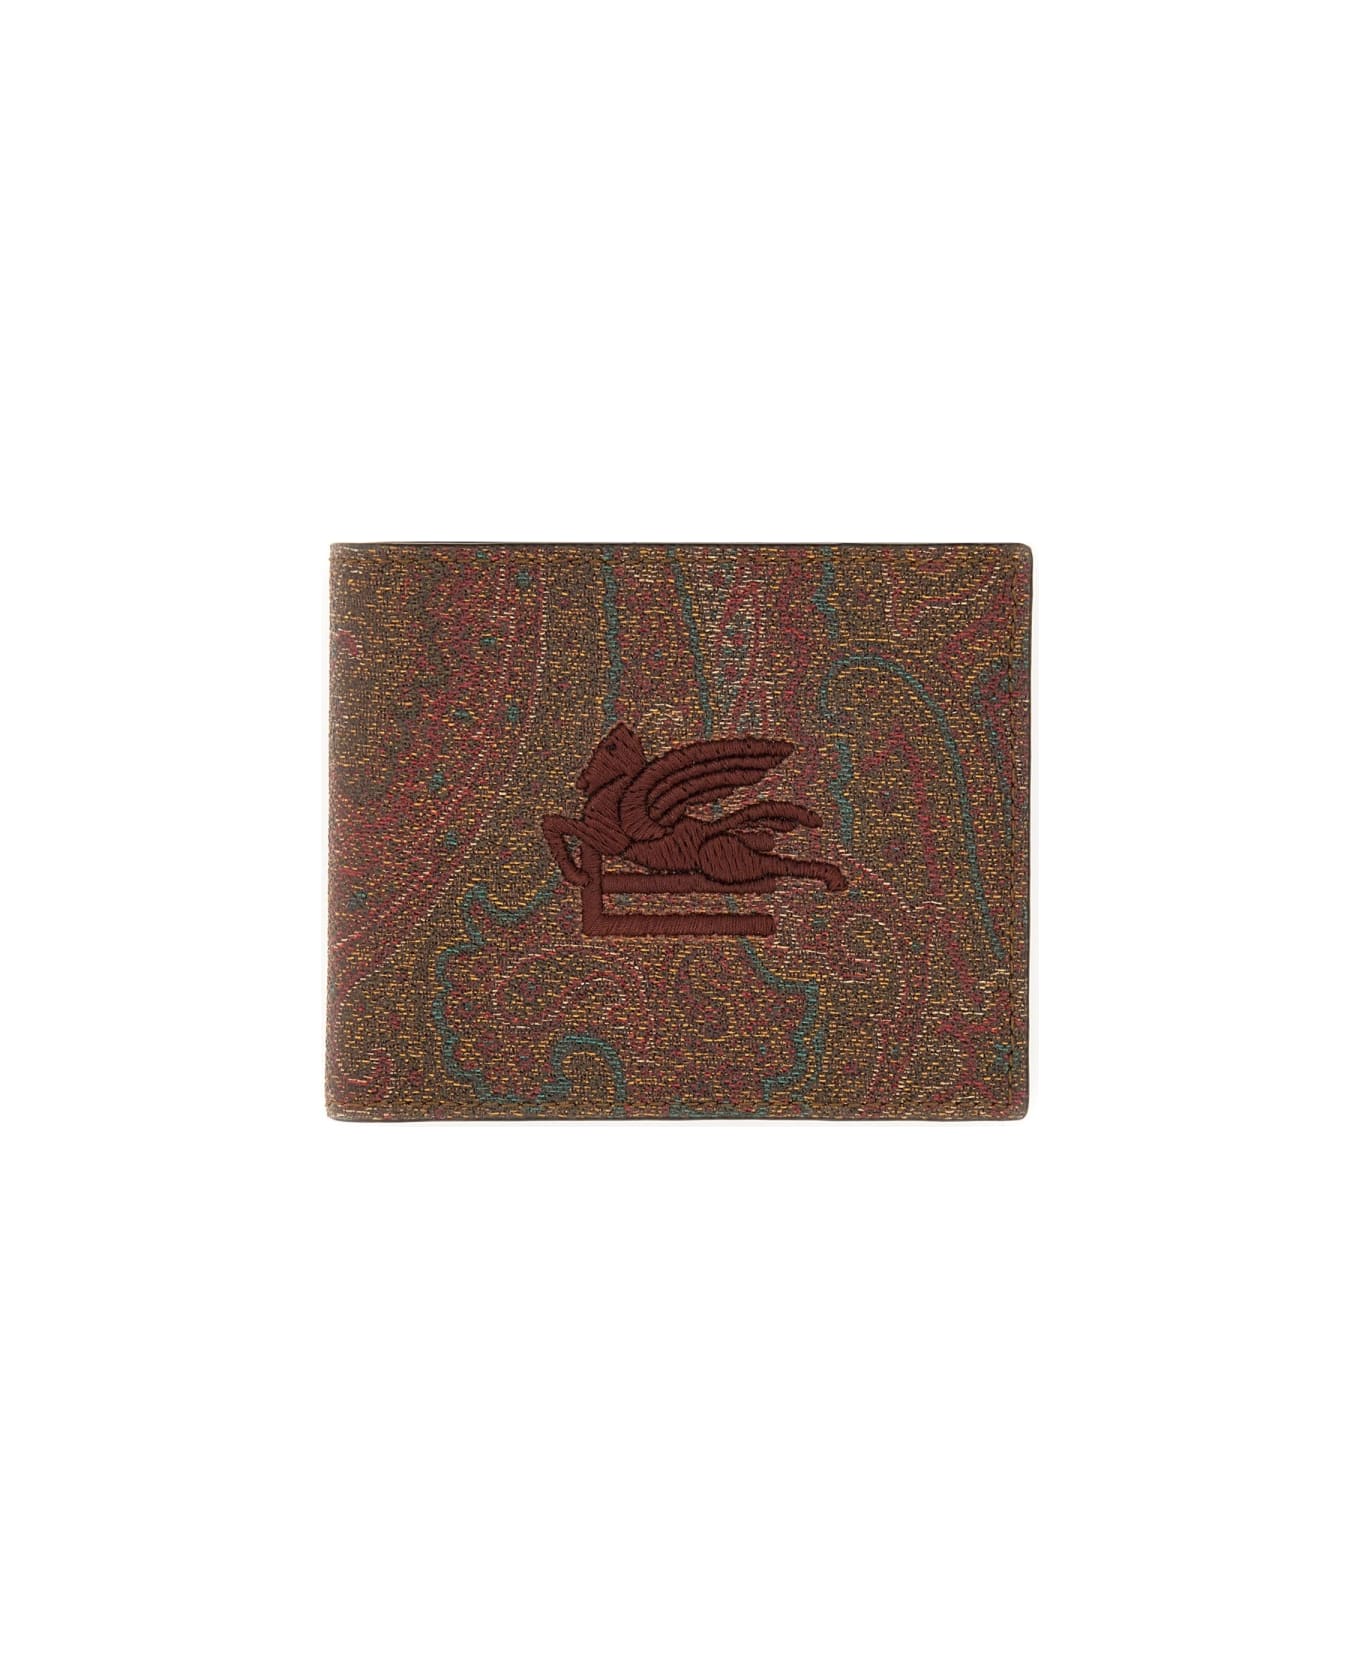 Etro Paisley Print Wallet - RED